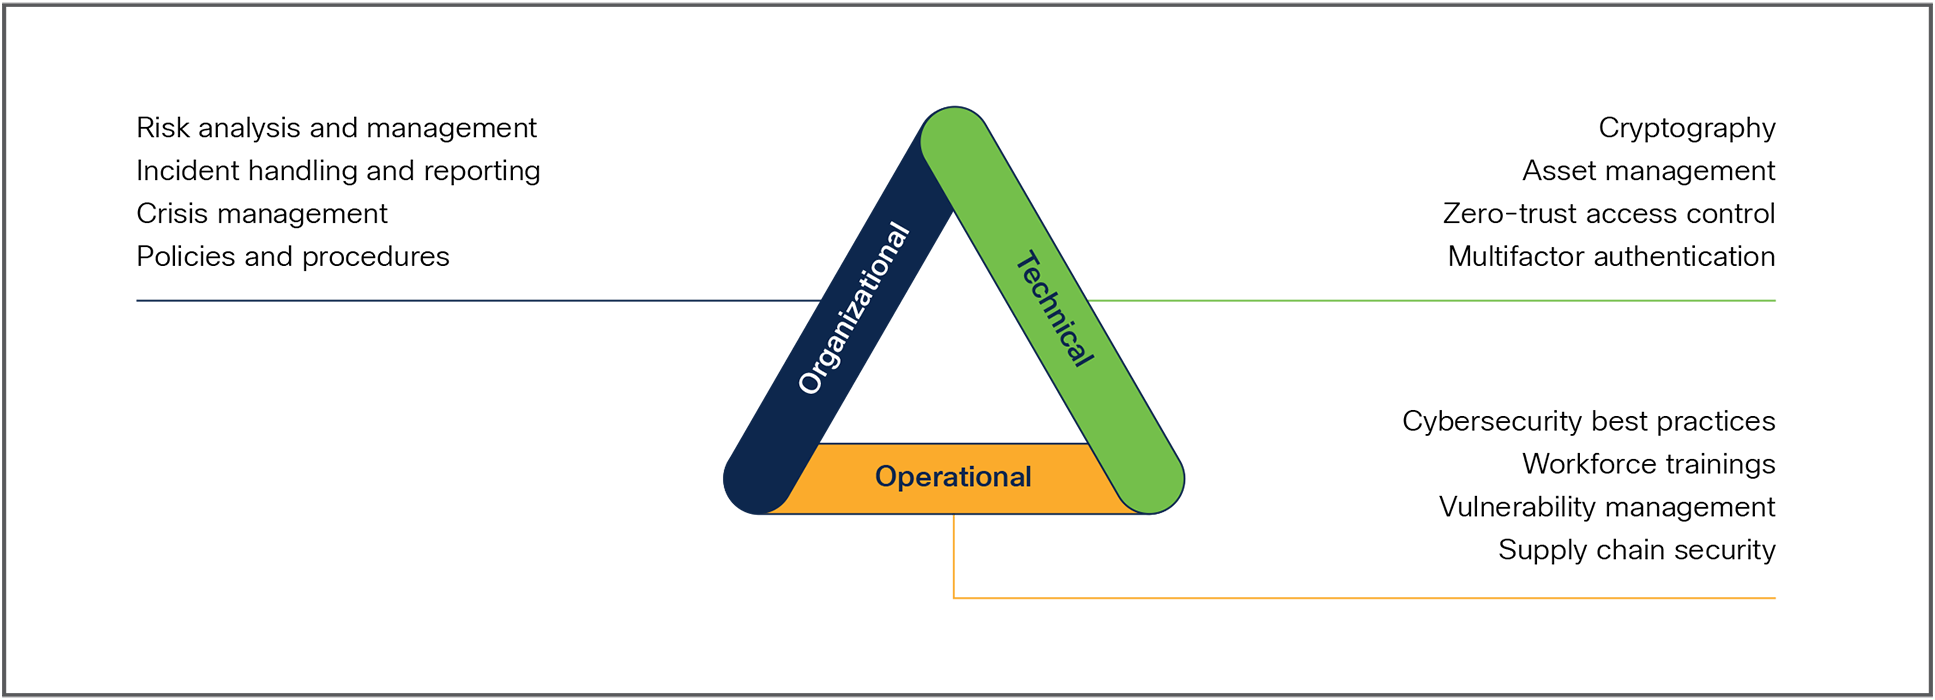 Organizational, technical, and operational categories of NIS2 security measures